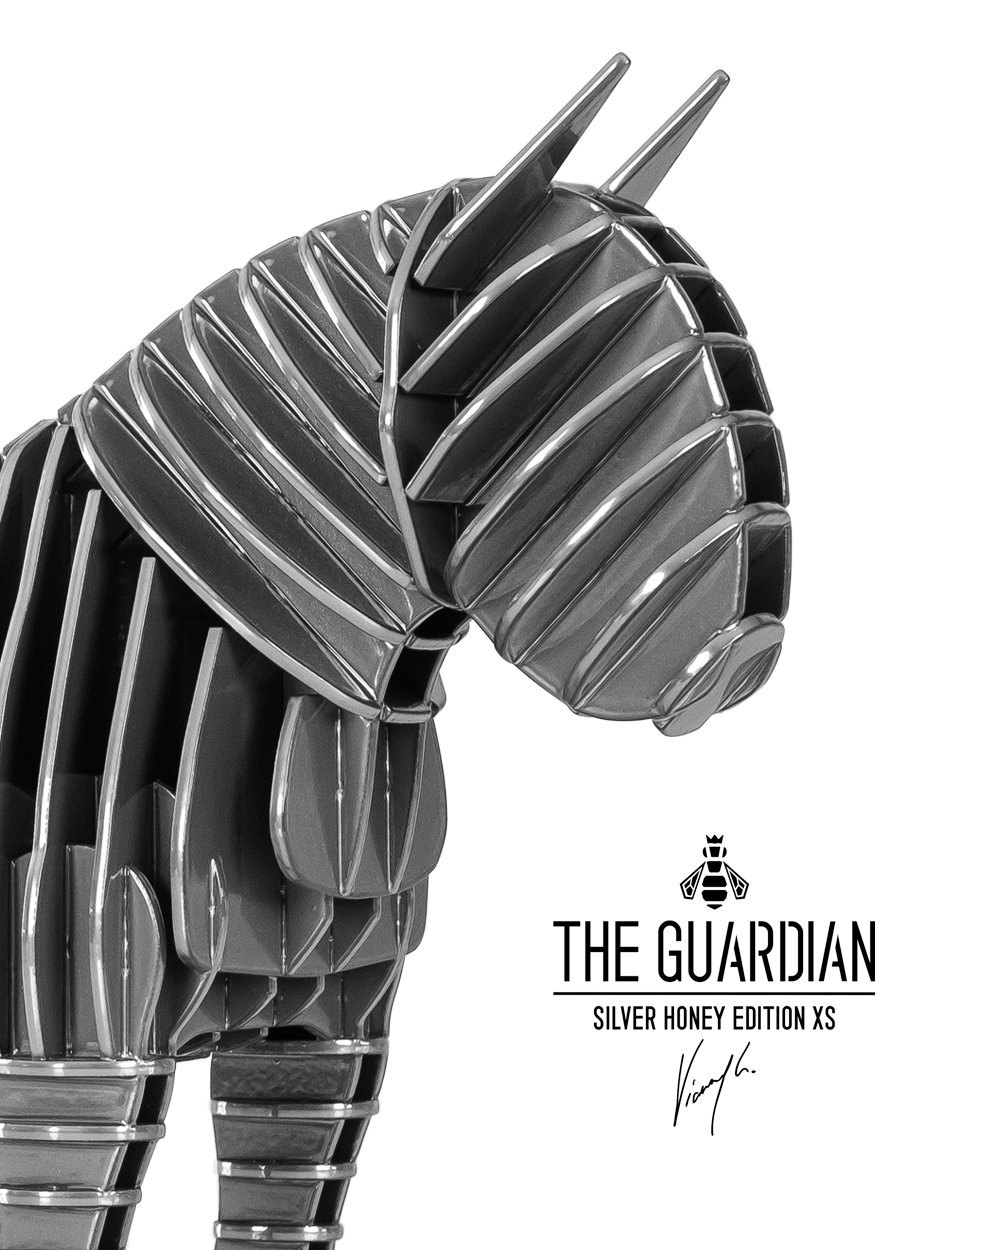 Image of The Guardian® - Silver Honey Edition XS - 8 units